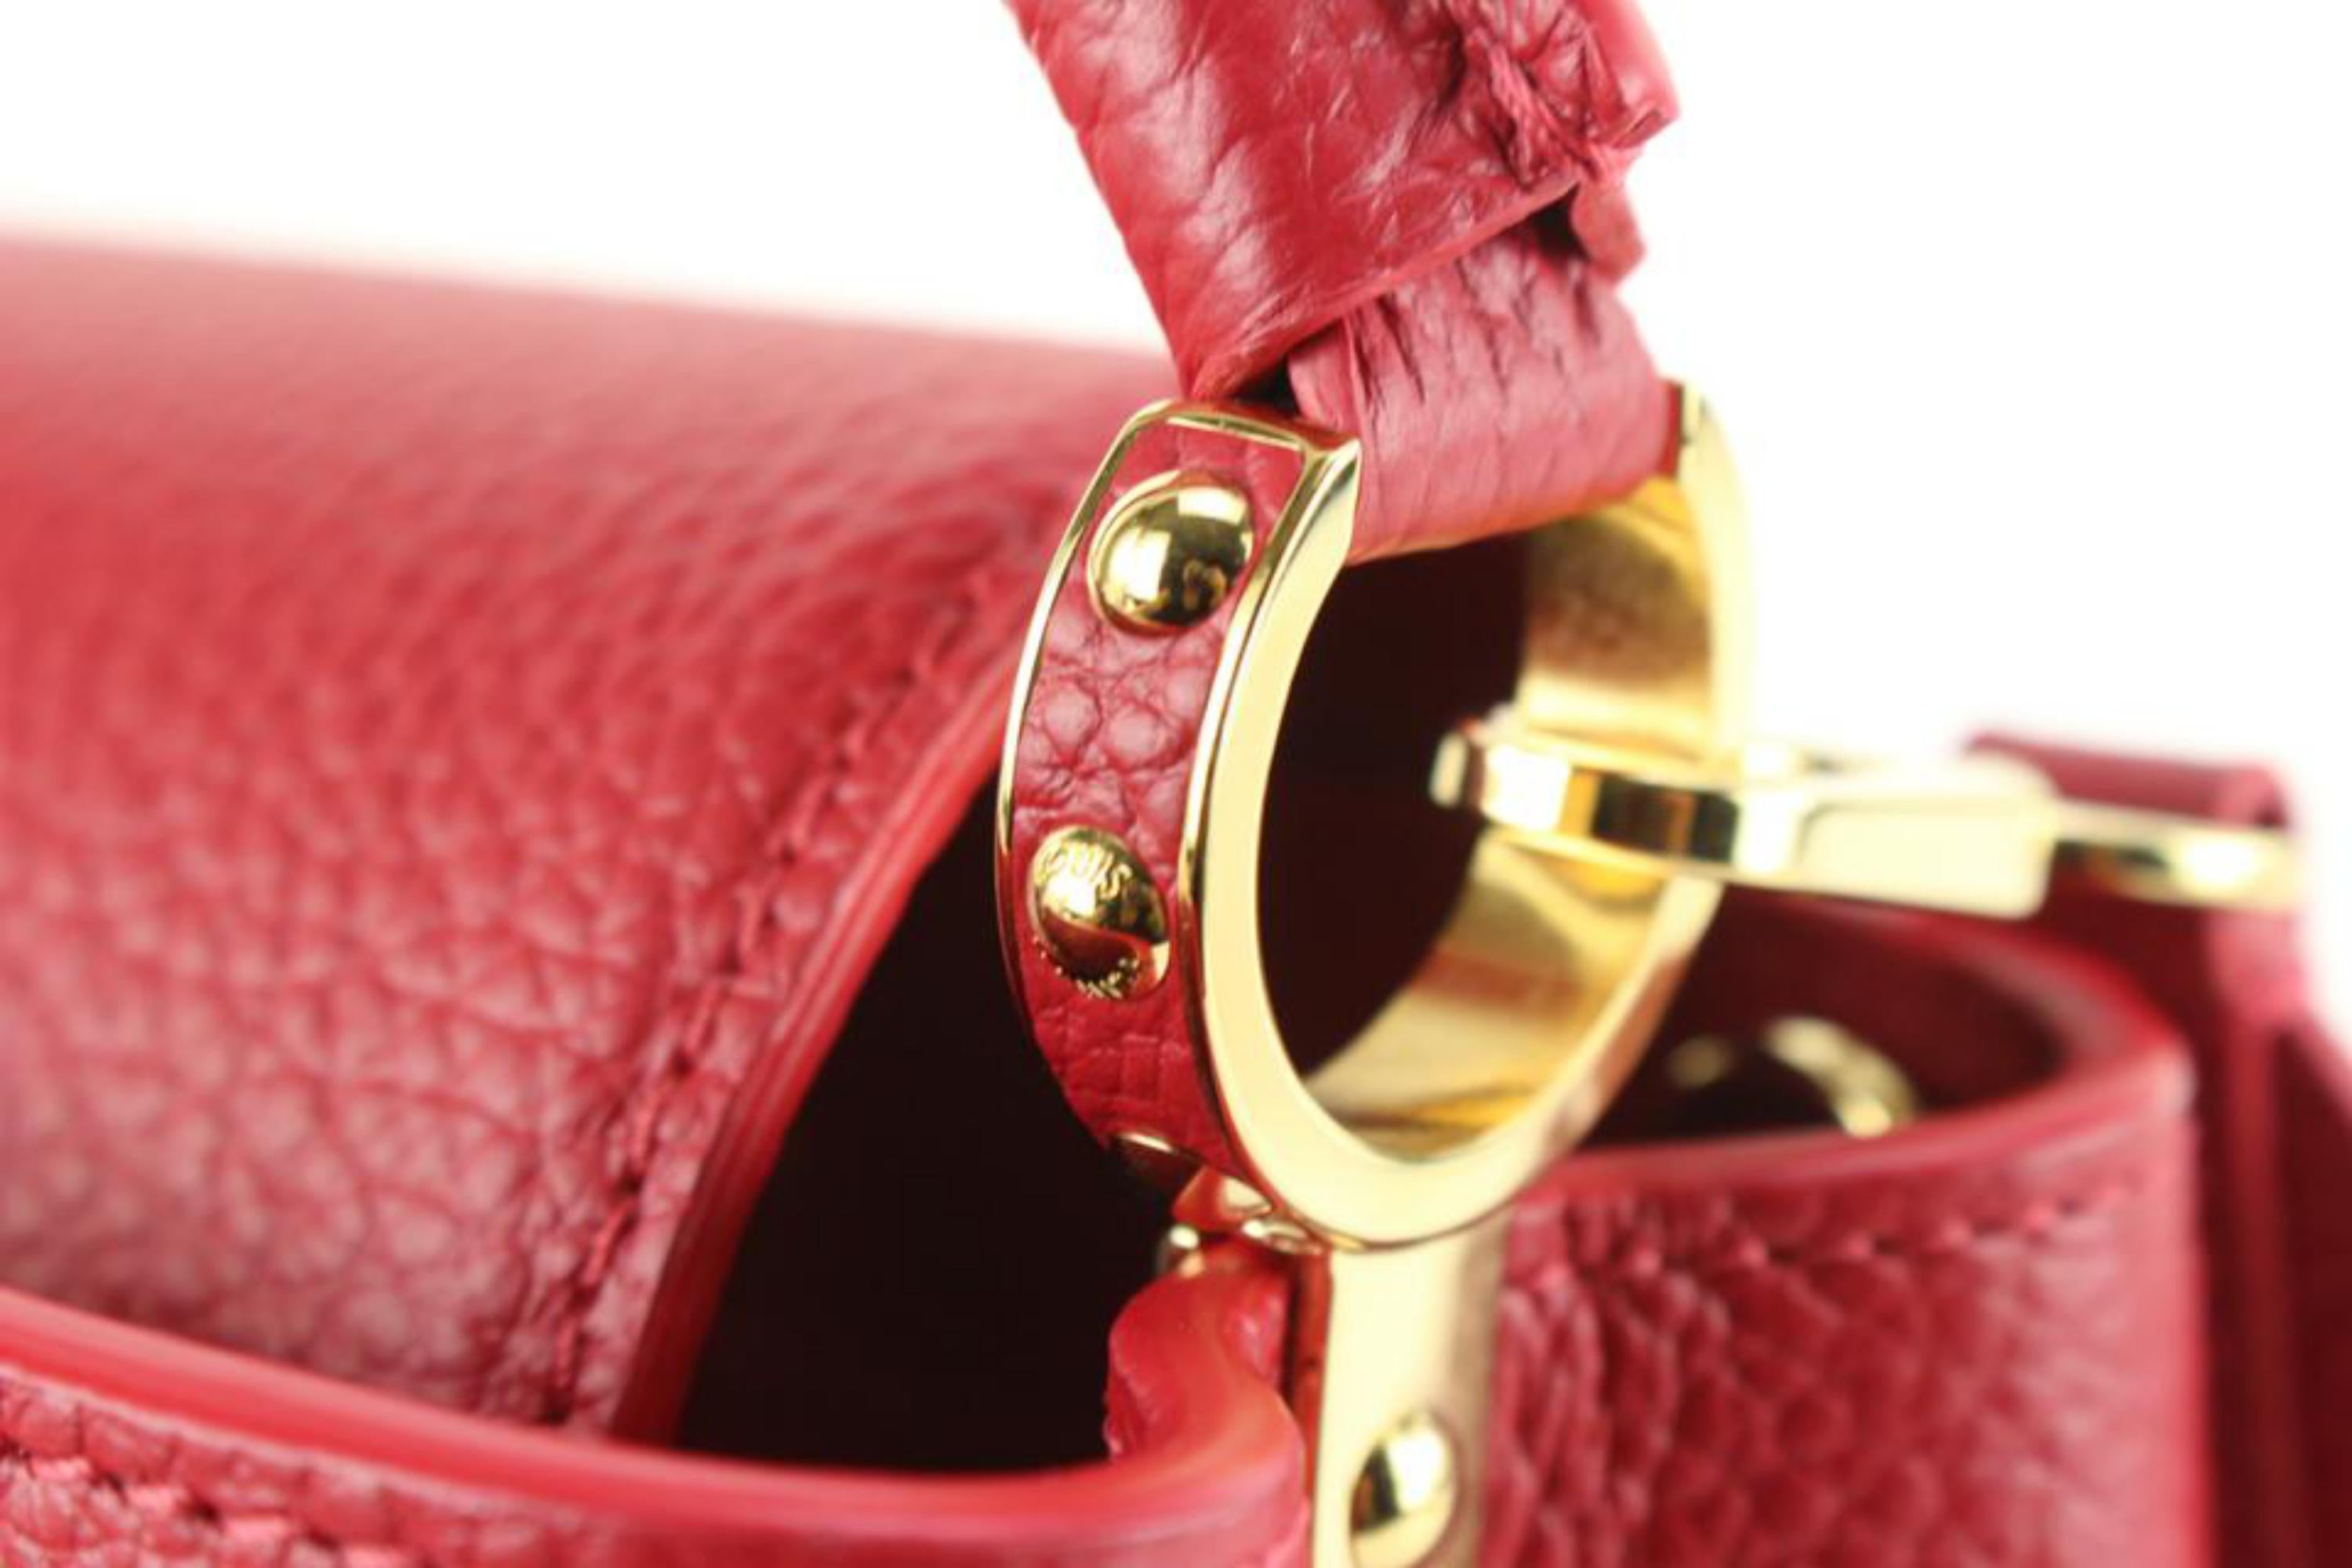 Bag of the day! LV Capucine Mini Scarlet Red. One of my fave's for